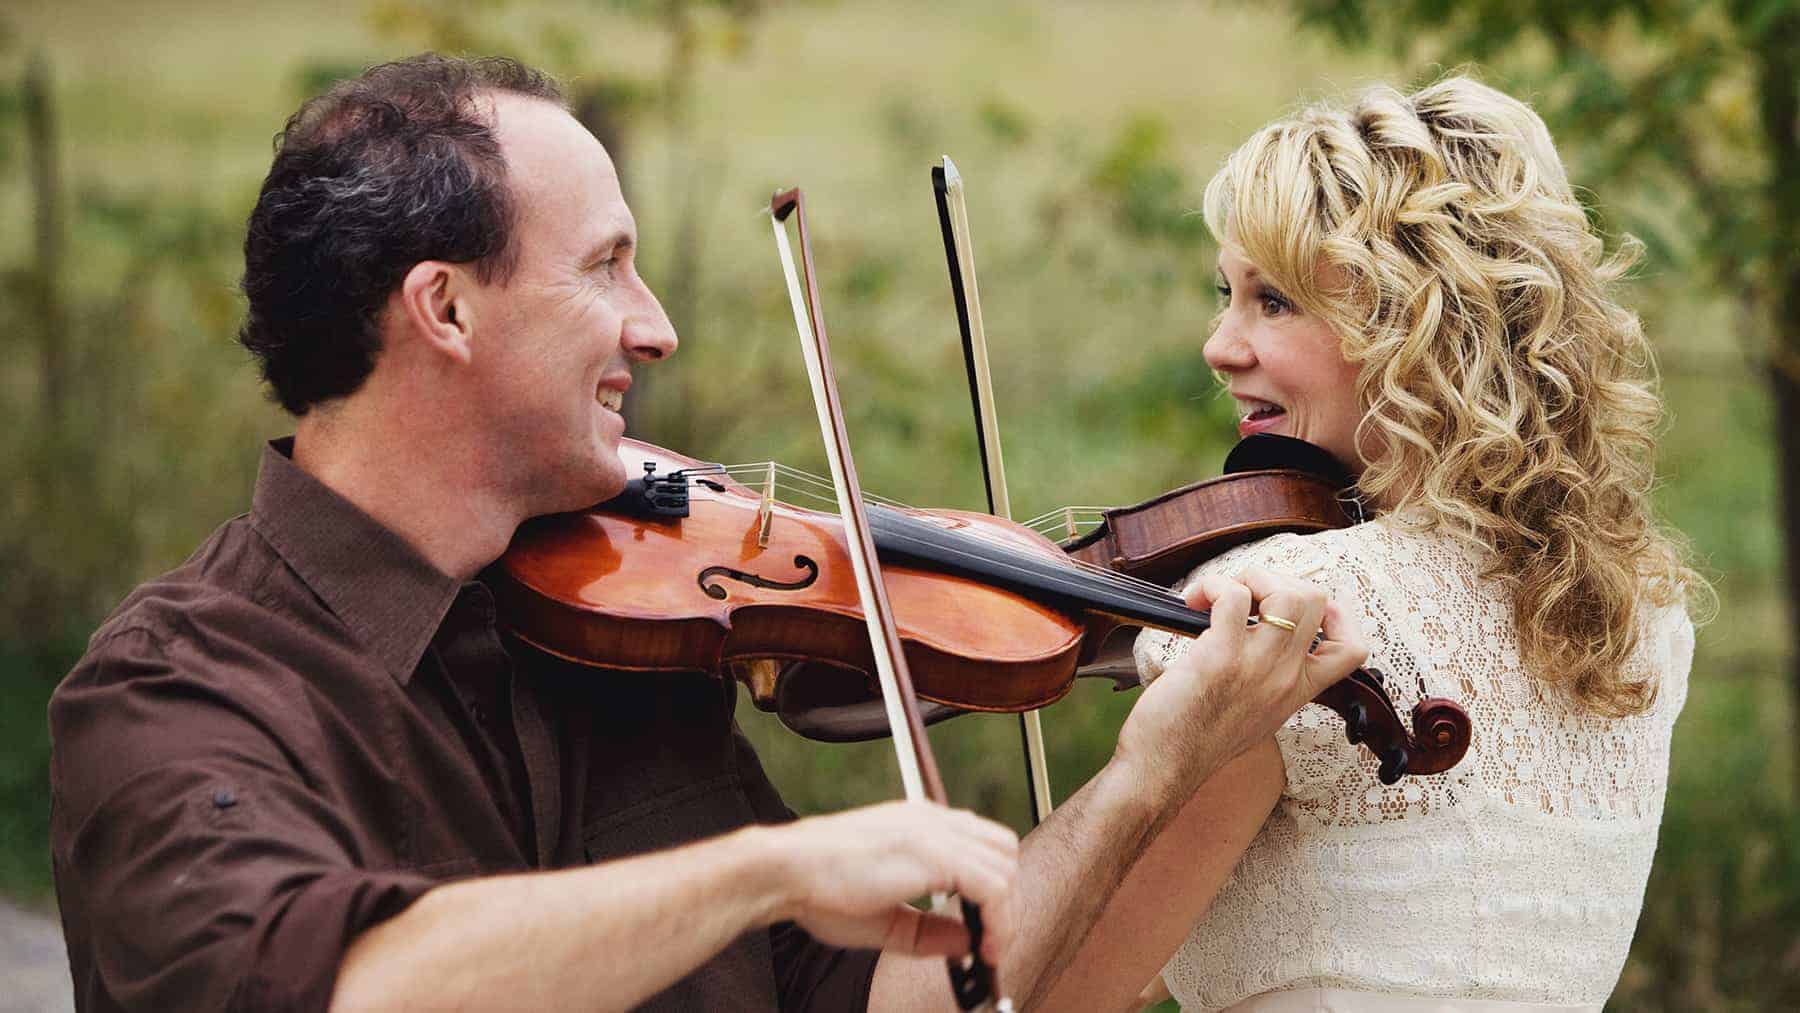 Cape Breton fiddlers Natalie MacMaster and Donnell Leahy present a Celtic Family Christmas.